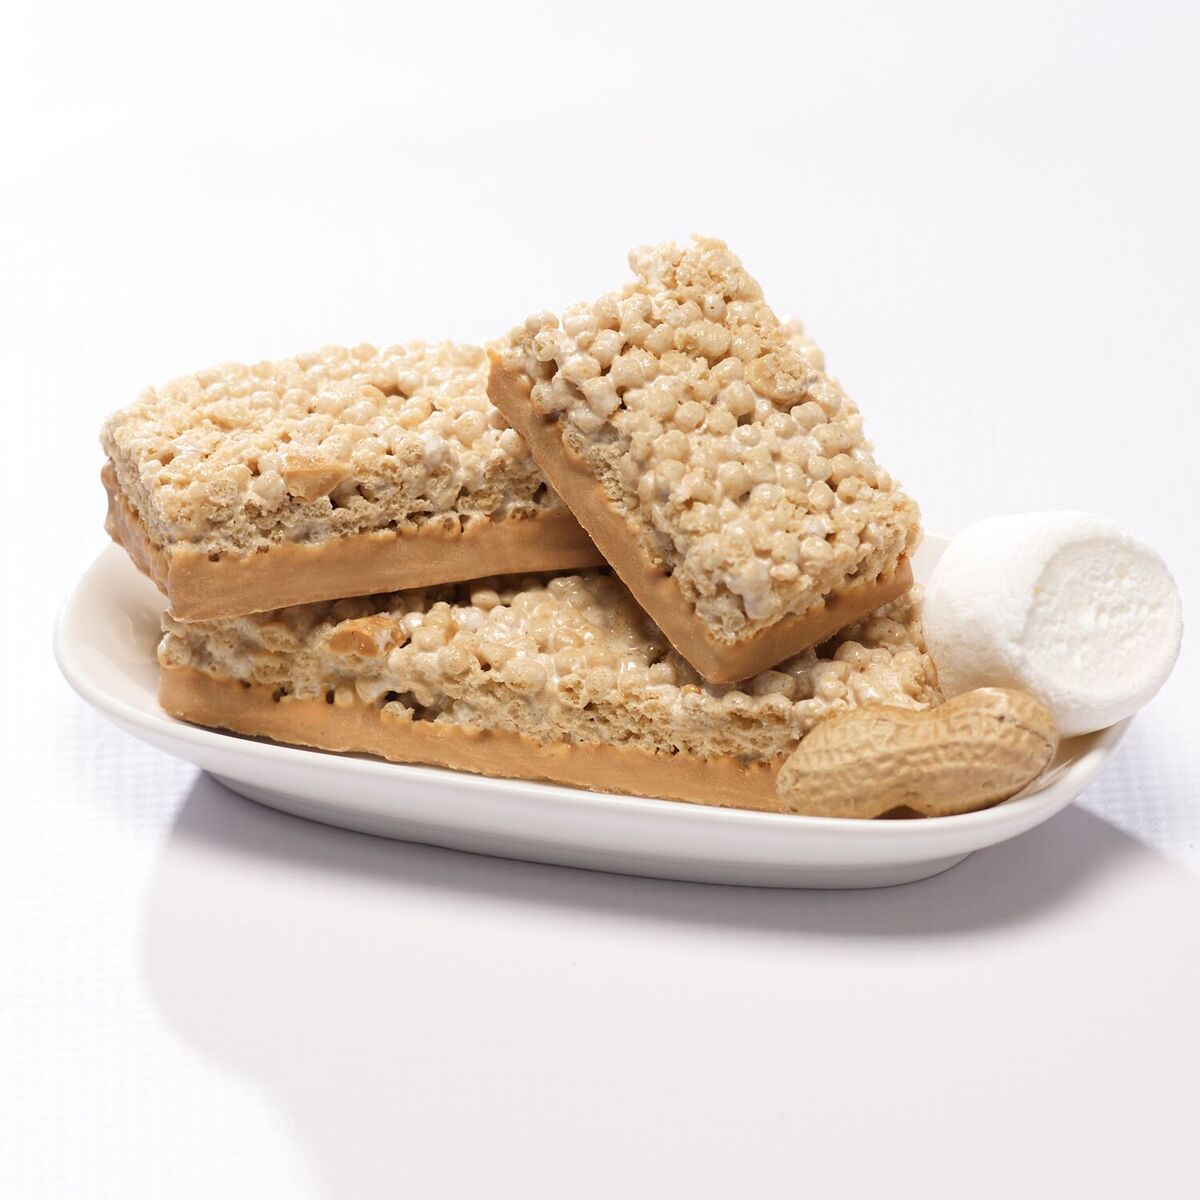 Fluffy Peanut Butter Protein bars on white dish with peanuts and marshmallow